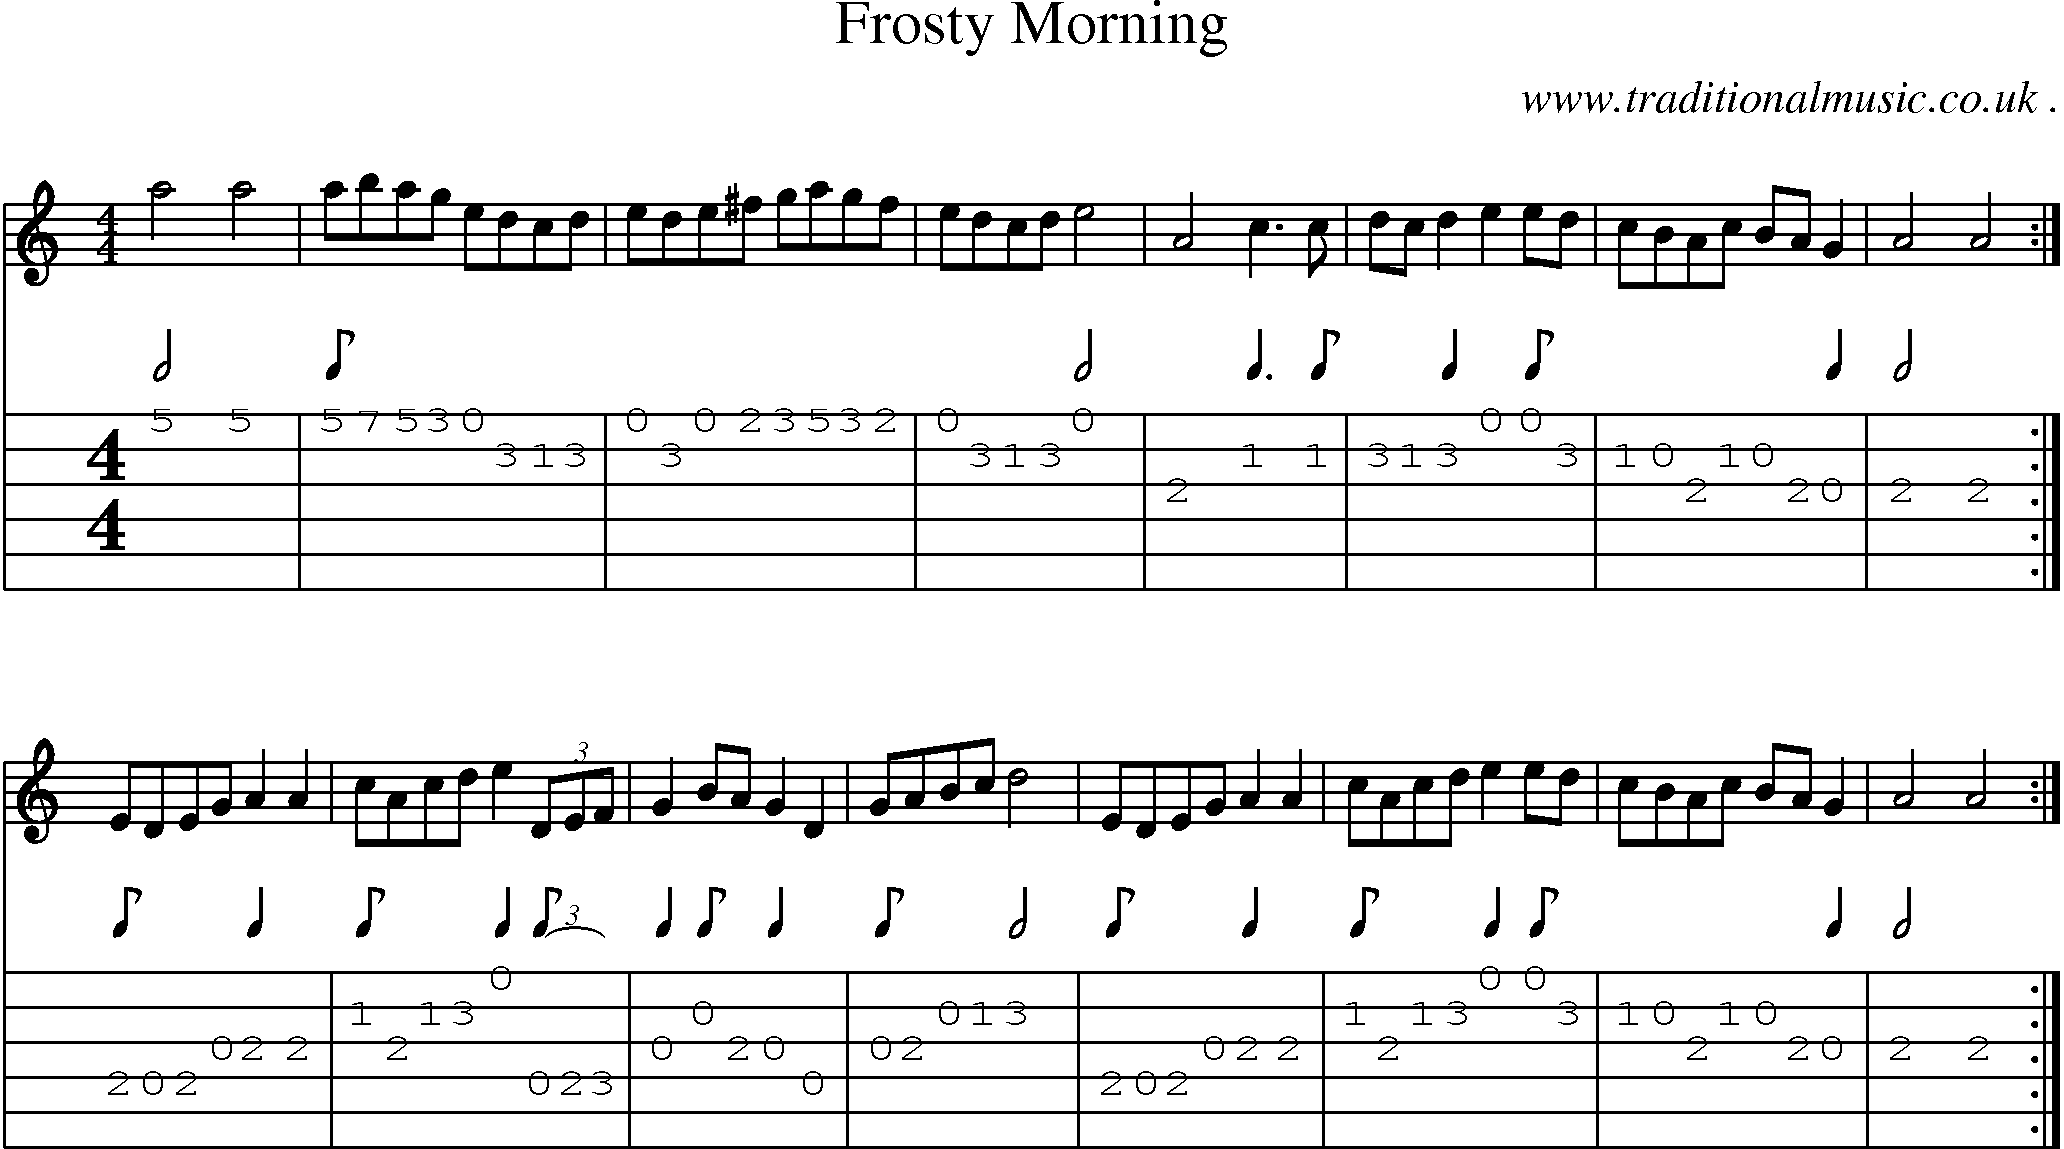 Sheet-music  score, Chords and Guitar Tabs for Frosty Morning